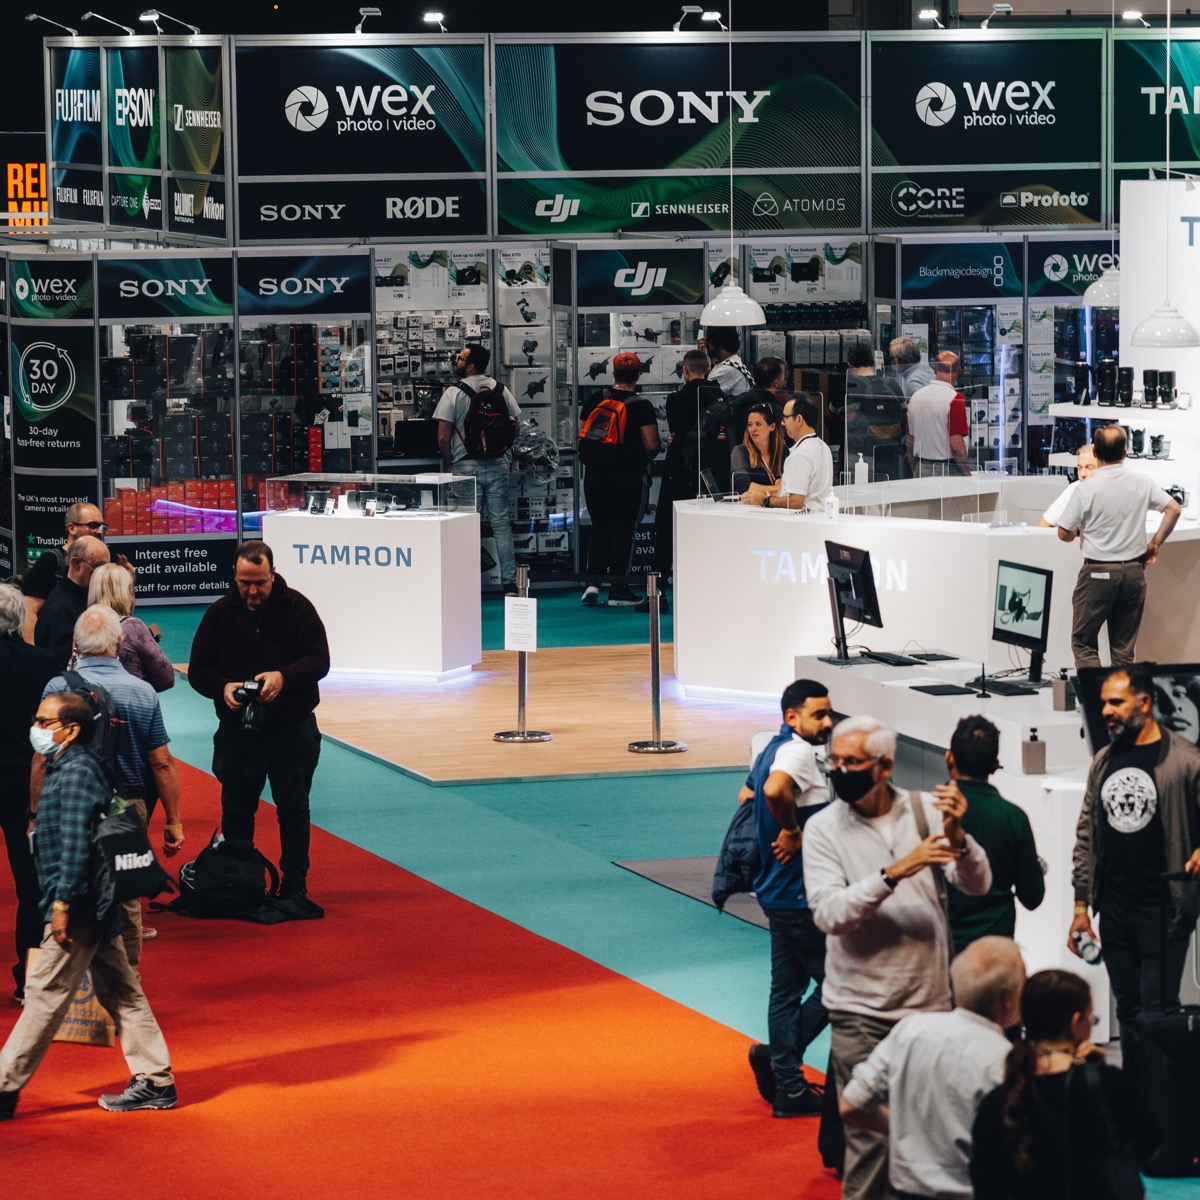 Six ways start ups can use digital signage at trade shows and expos to stand out